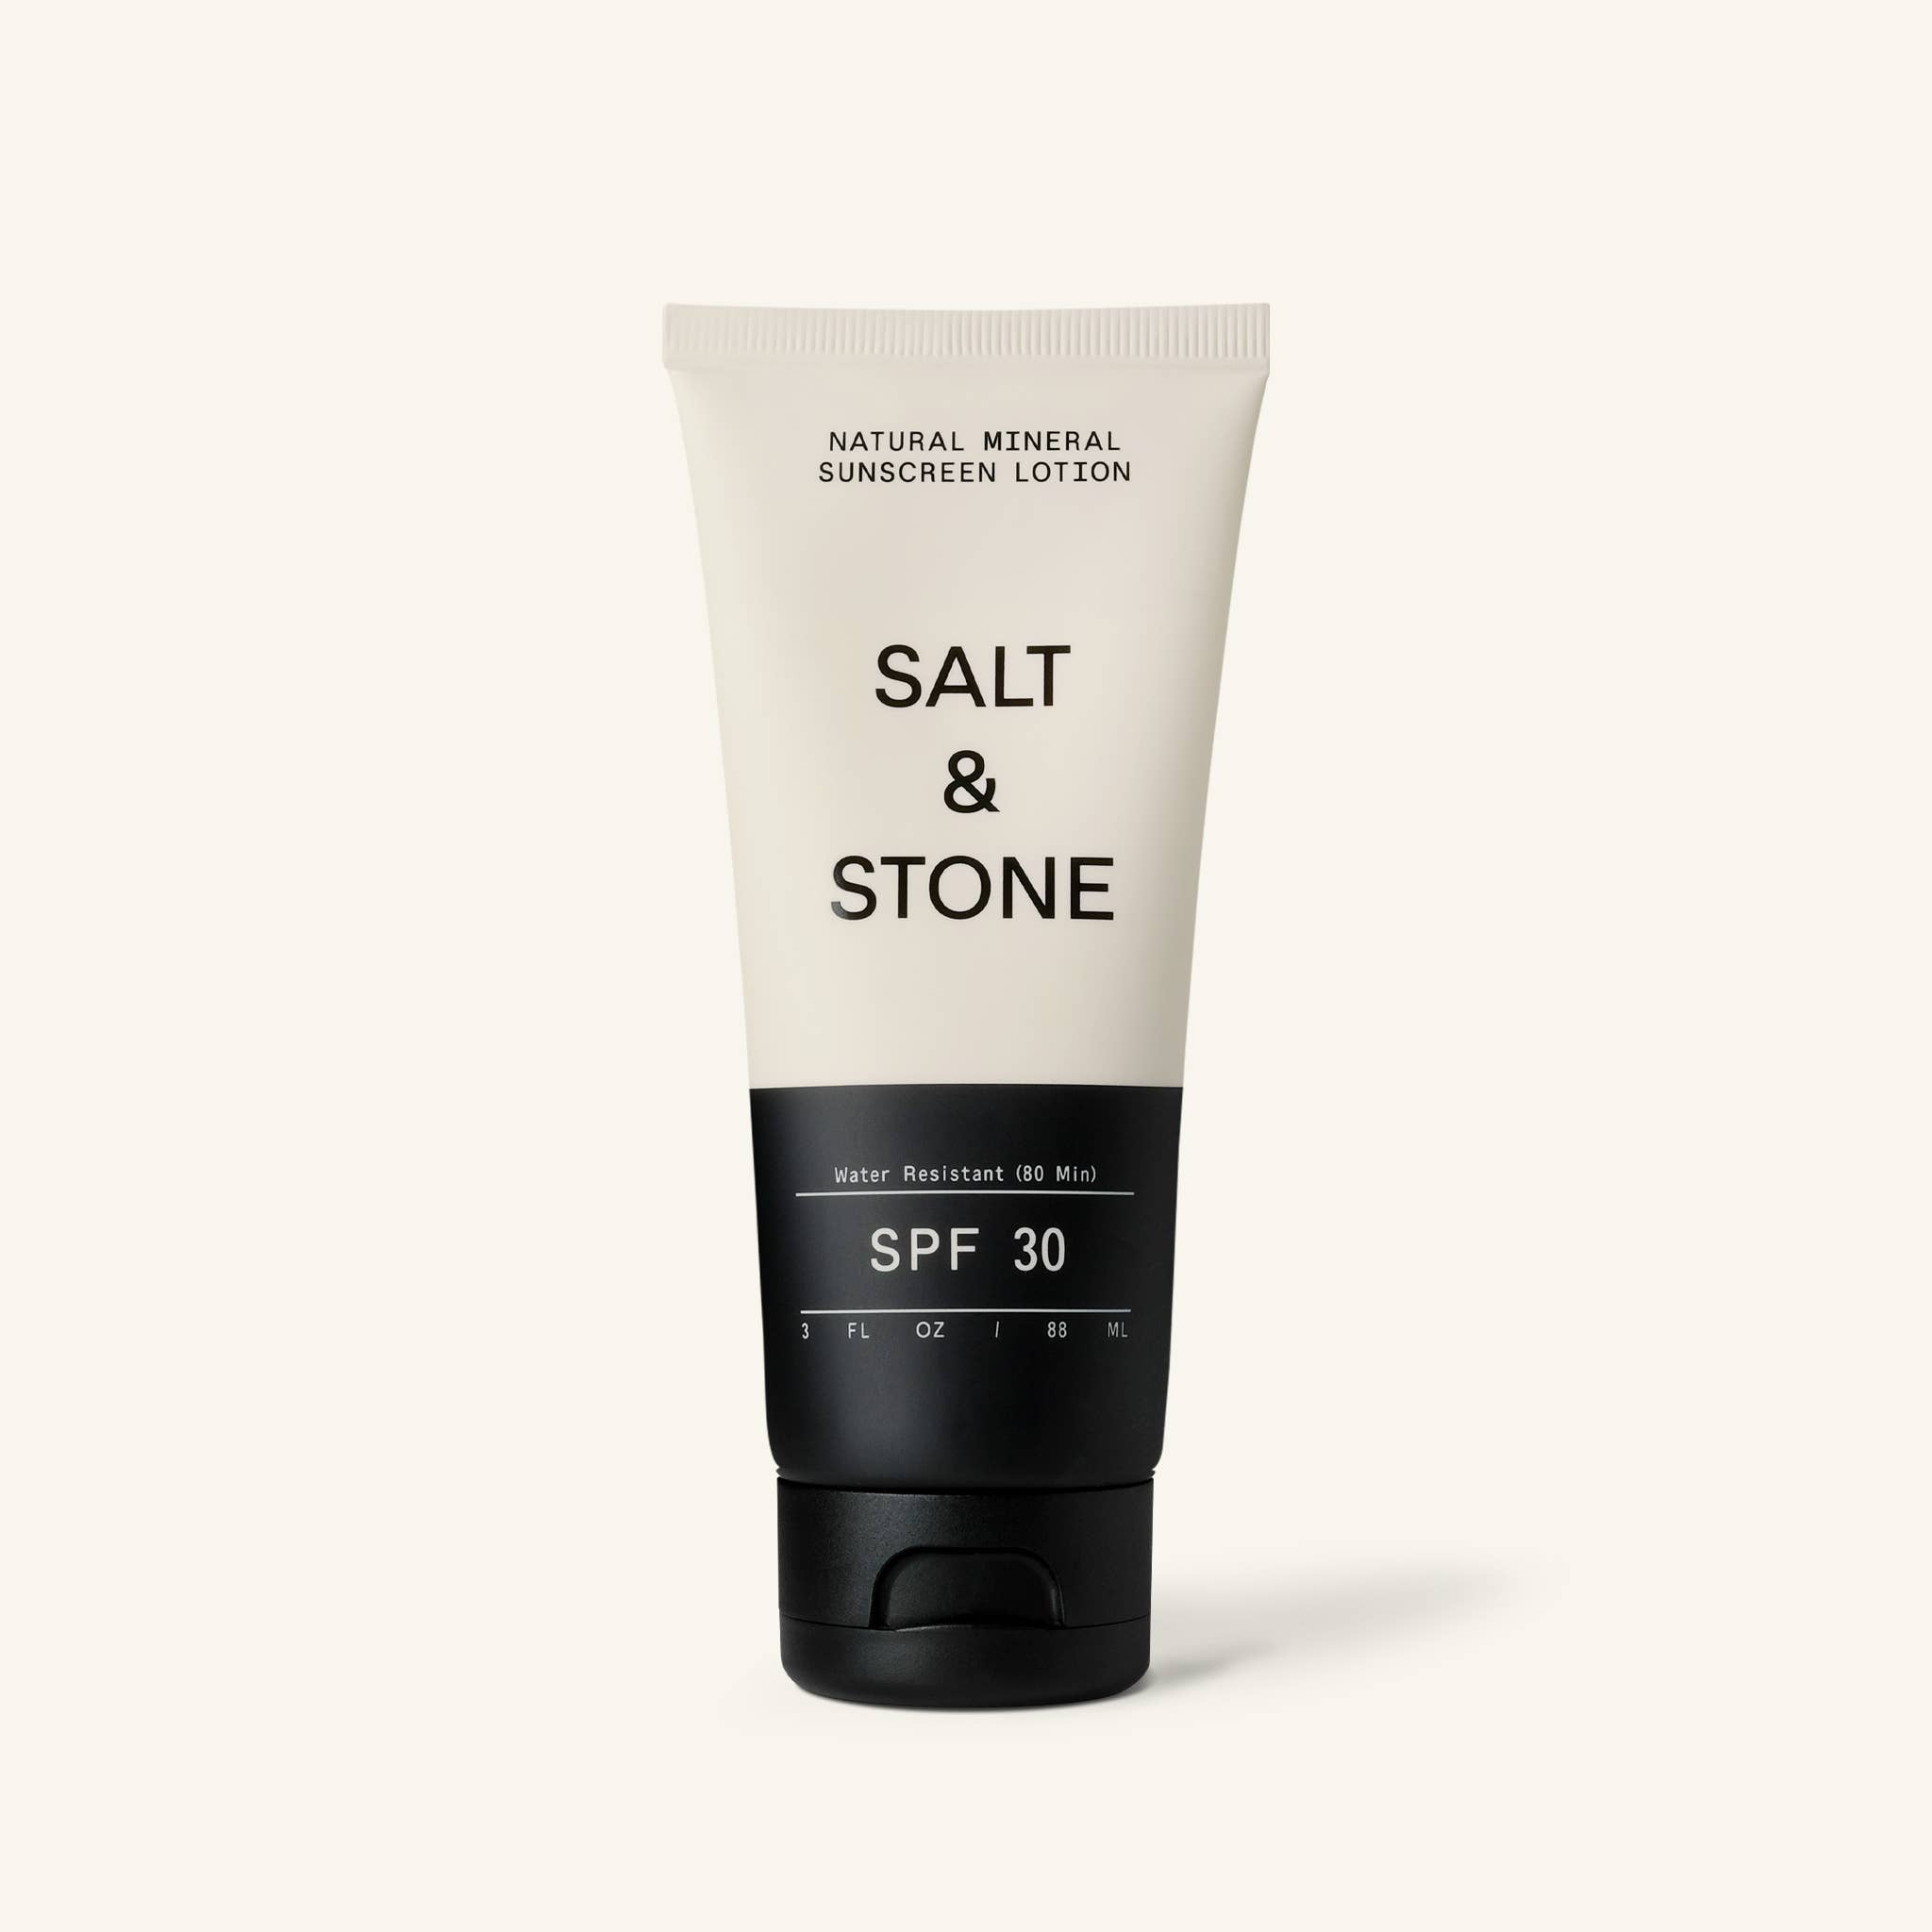 Salt and Stone Natural Mineral Sunscreen Lotion SPF 30